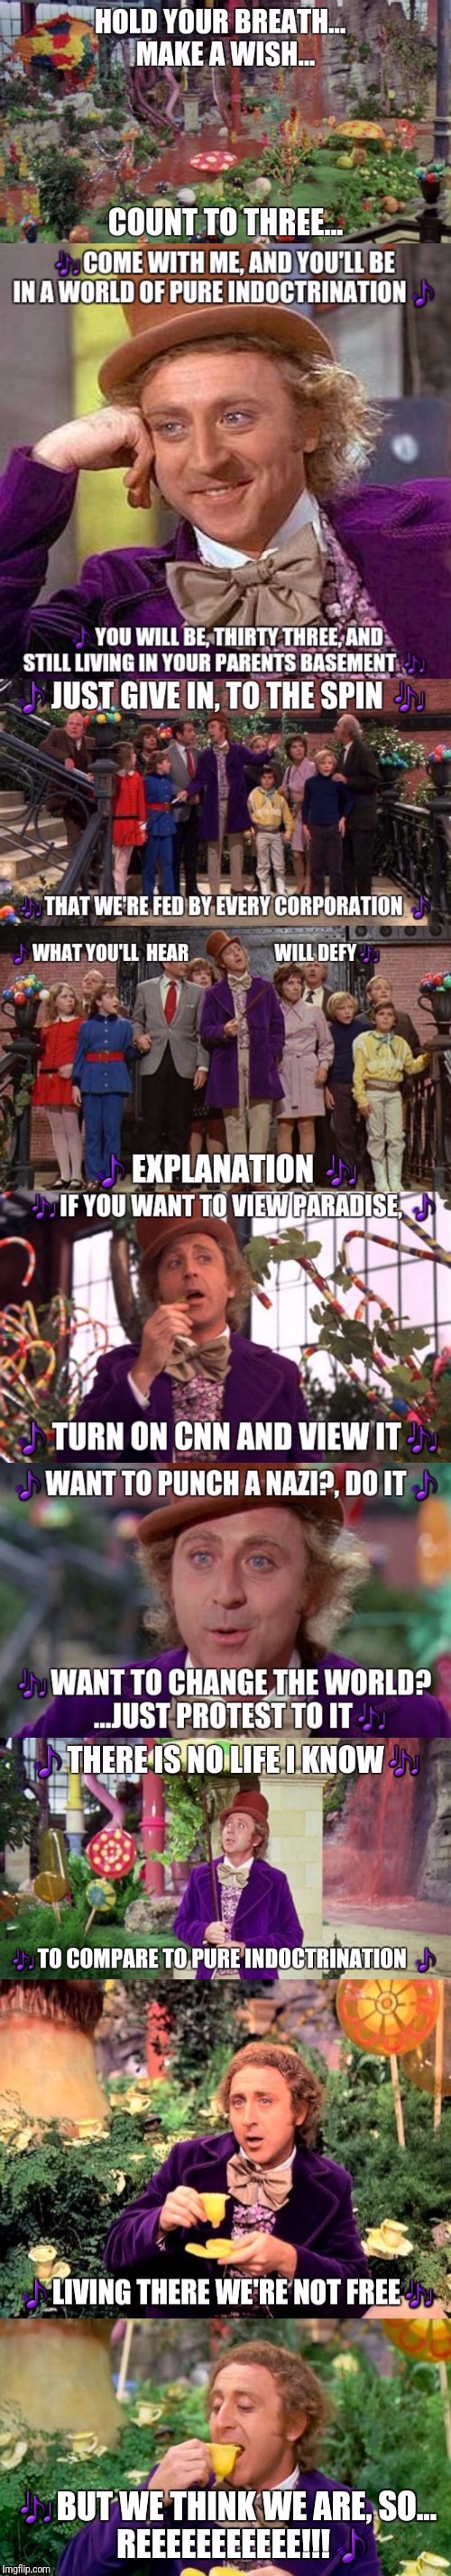 Pure Indoctrination | image tagged in willy wonka,mainstream media,media lies,liberal media,indoctrination | made w/ Imgflip meme maker